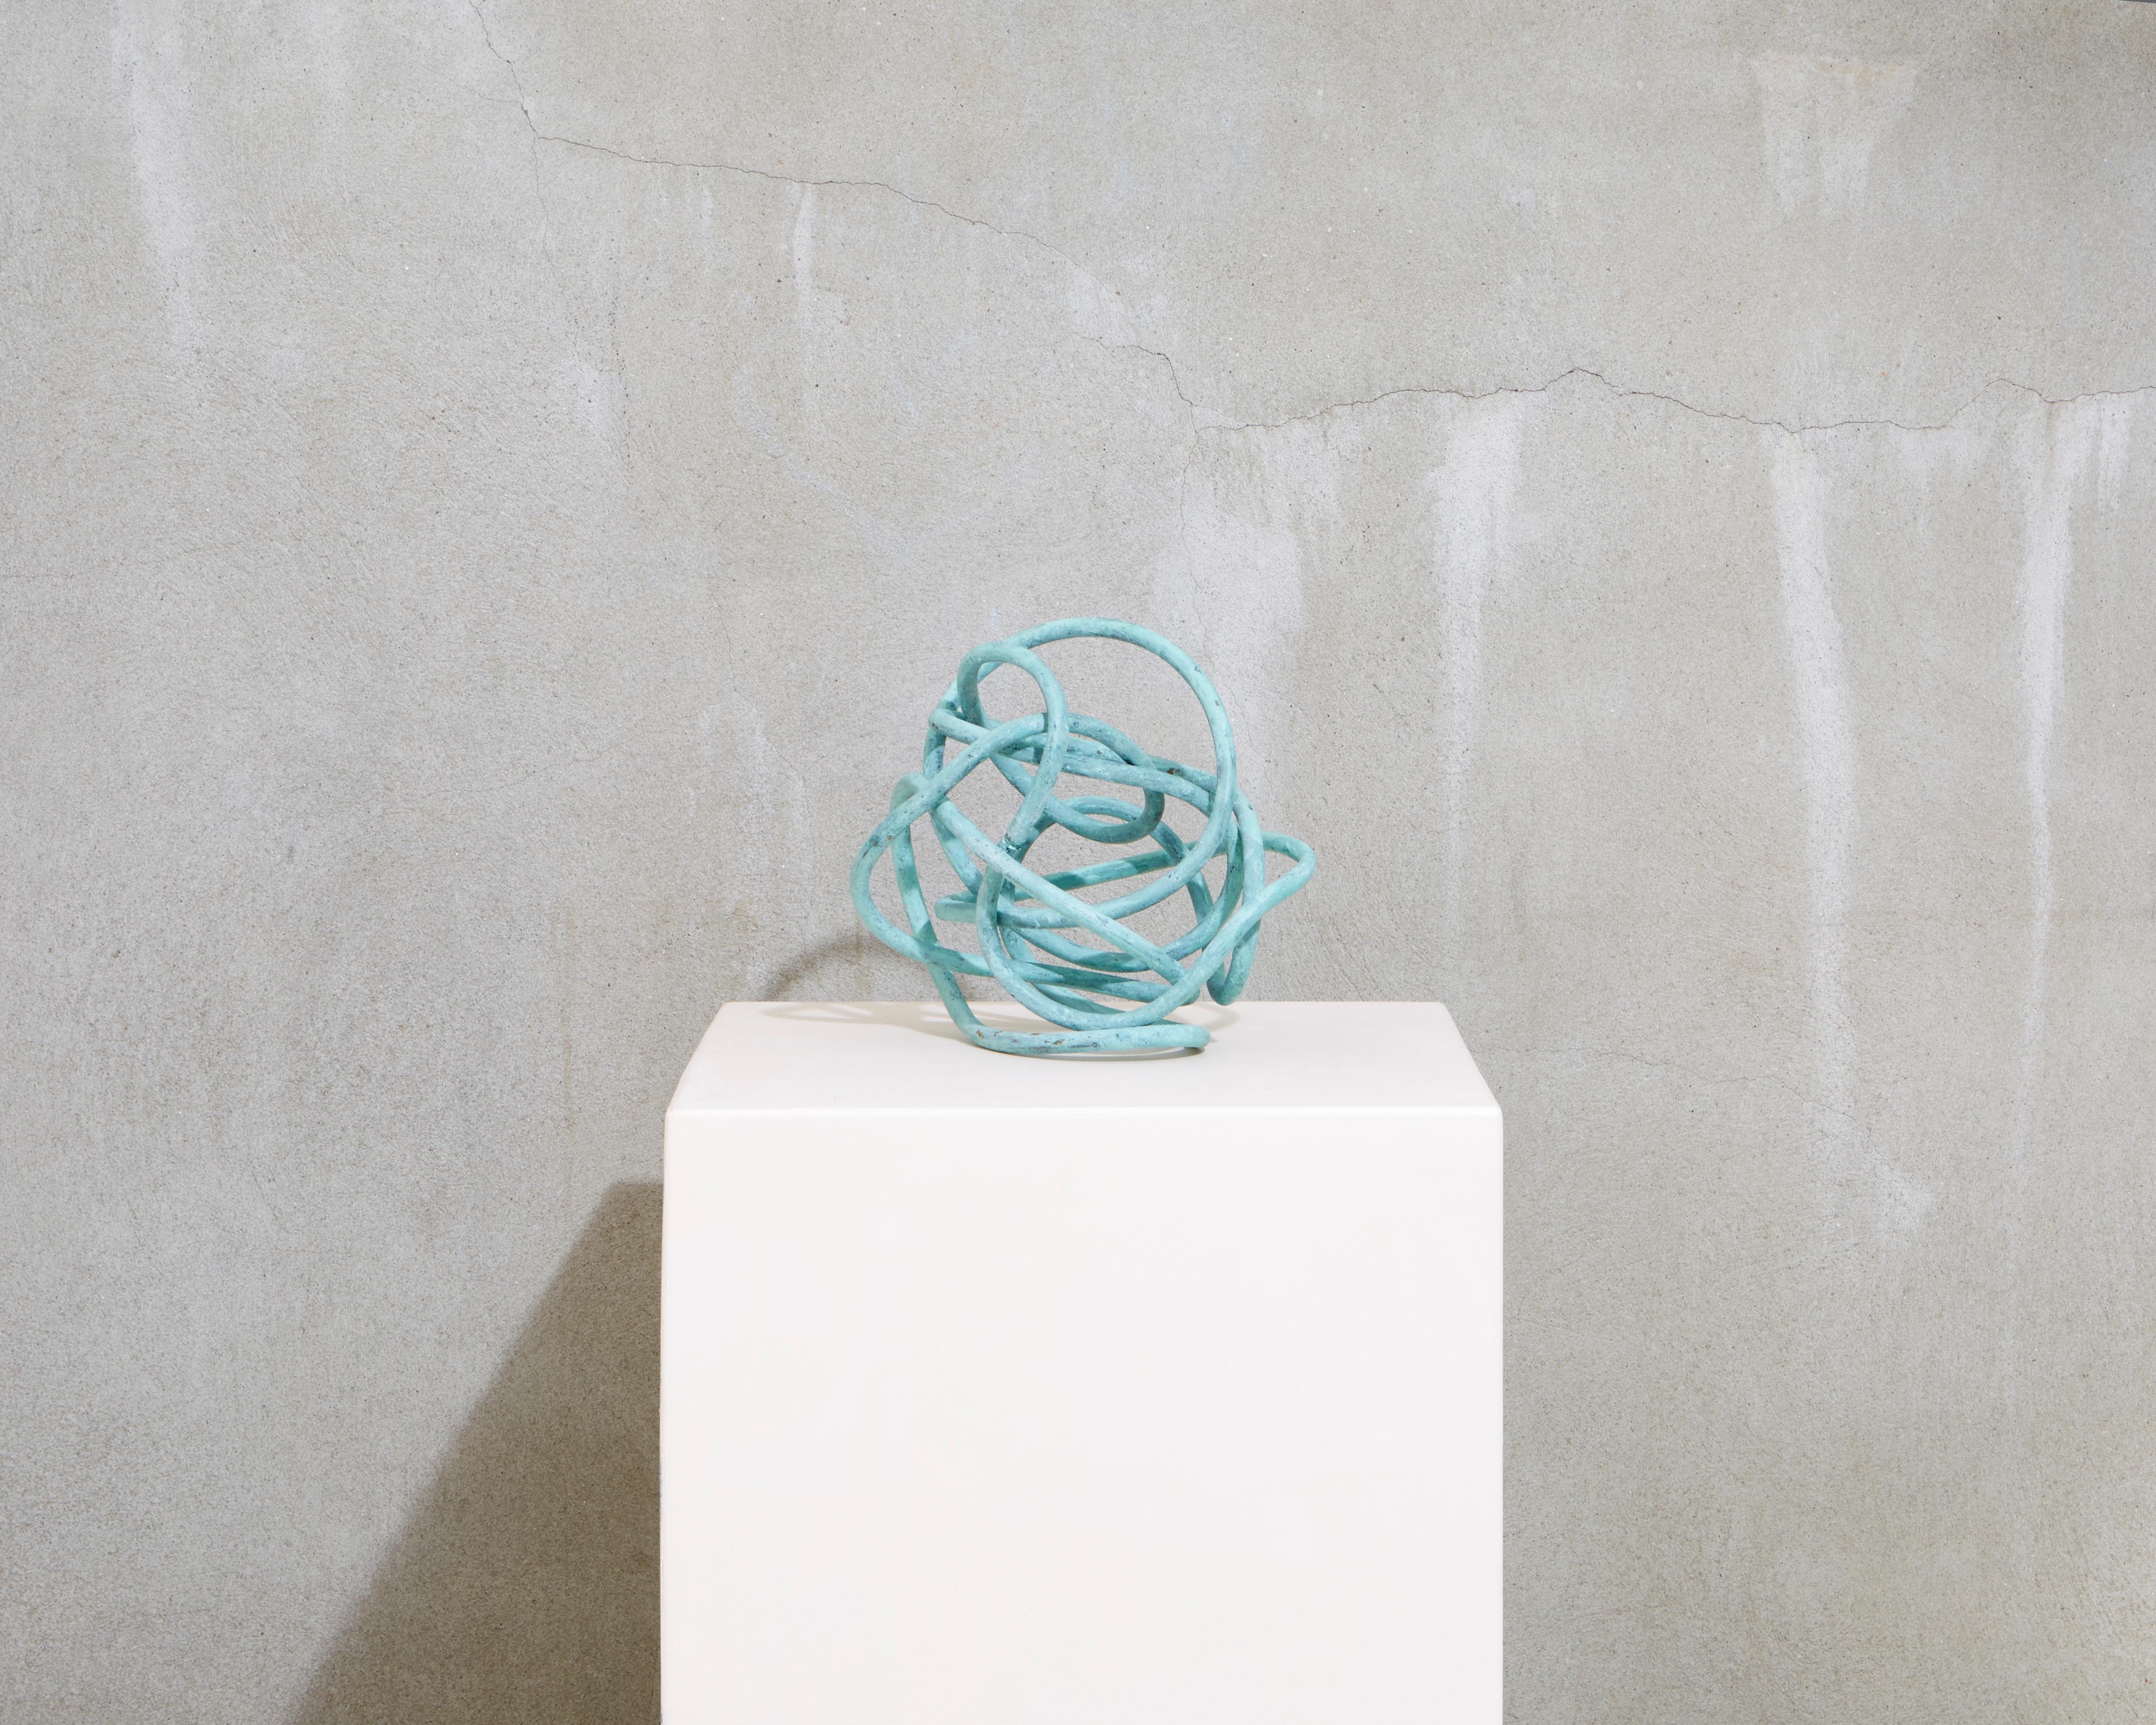 Bending and twisting this form contains the energy of the universe in an unending tangle of form that can exist on a shelf, plinth or most any surface.    
The Copper Knot is a decorative sculpture from the North Fork Collection at Studio Melrose.